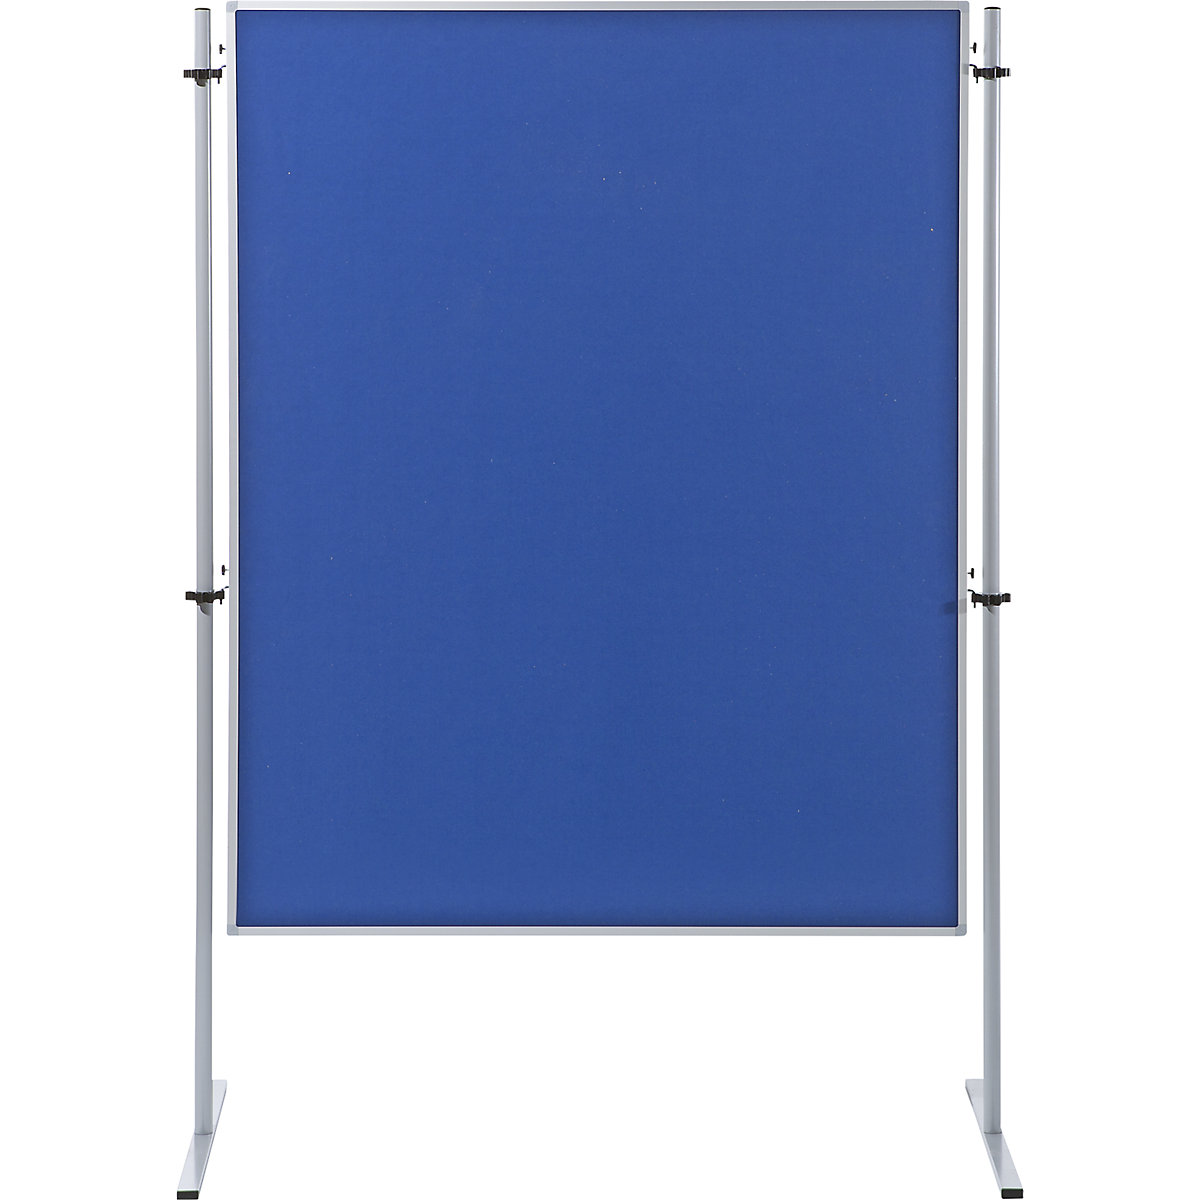 Functional partitions – eurokraft basic, fabric cover, HxW 1500 x 1200 mm, royal blue, pack of 1-10